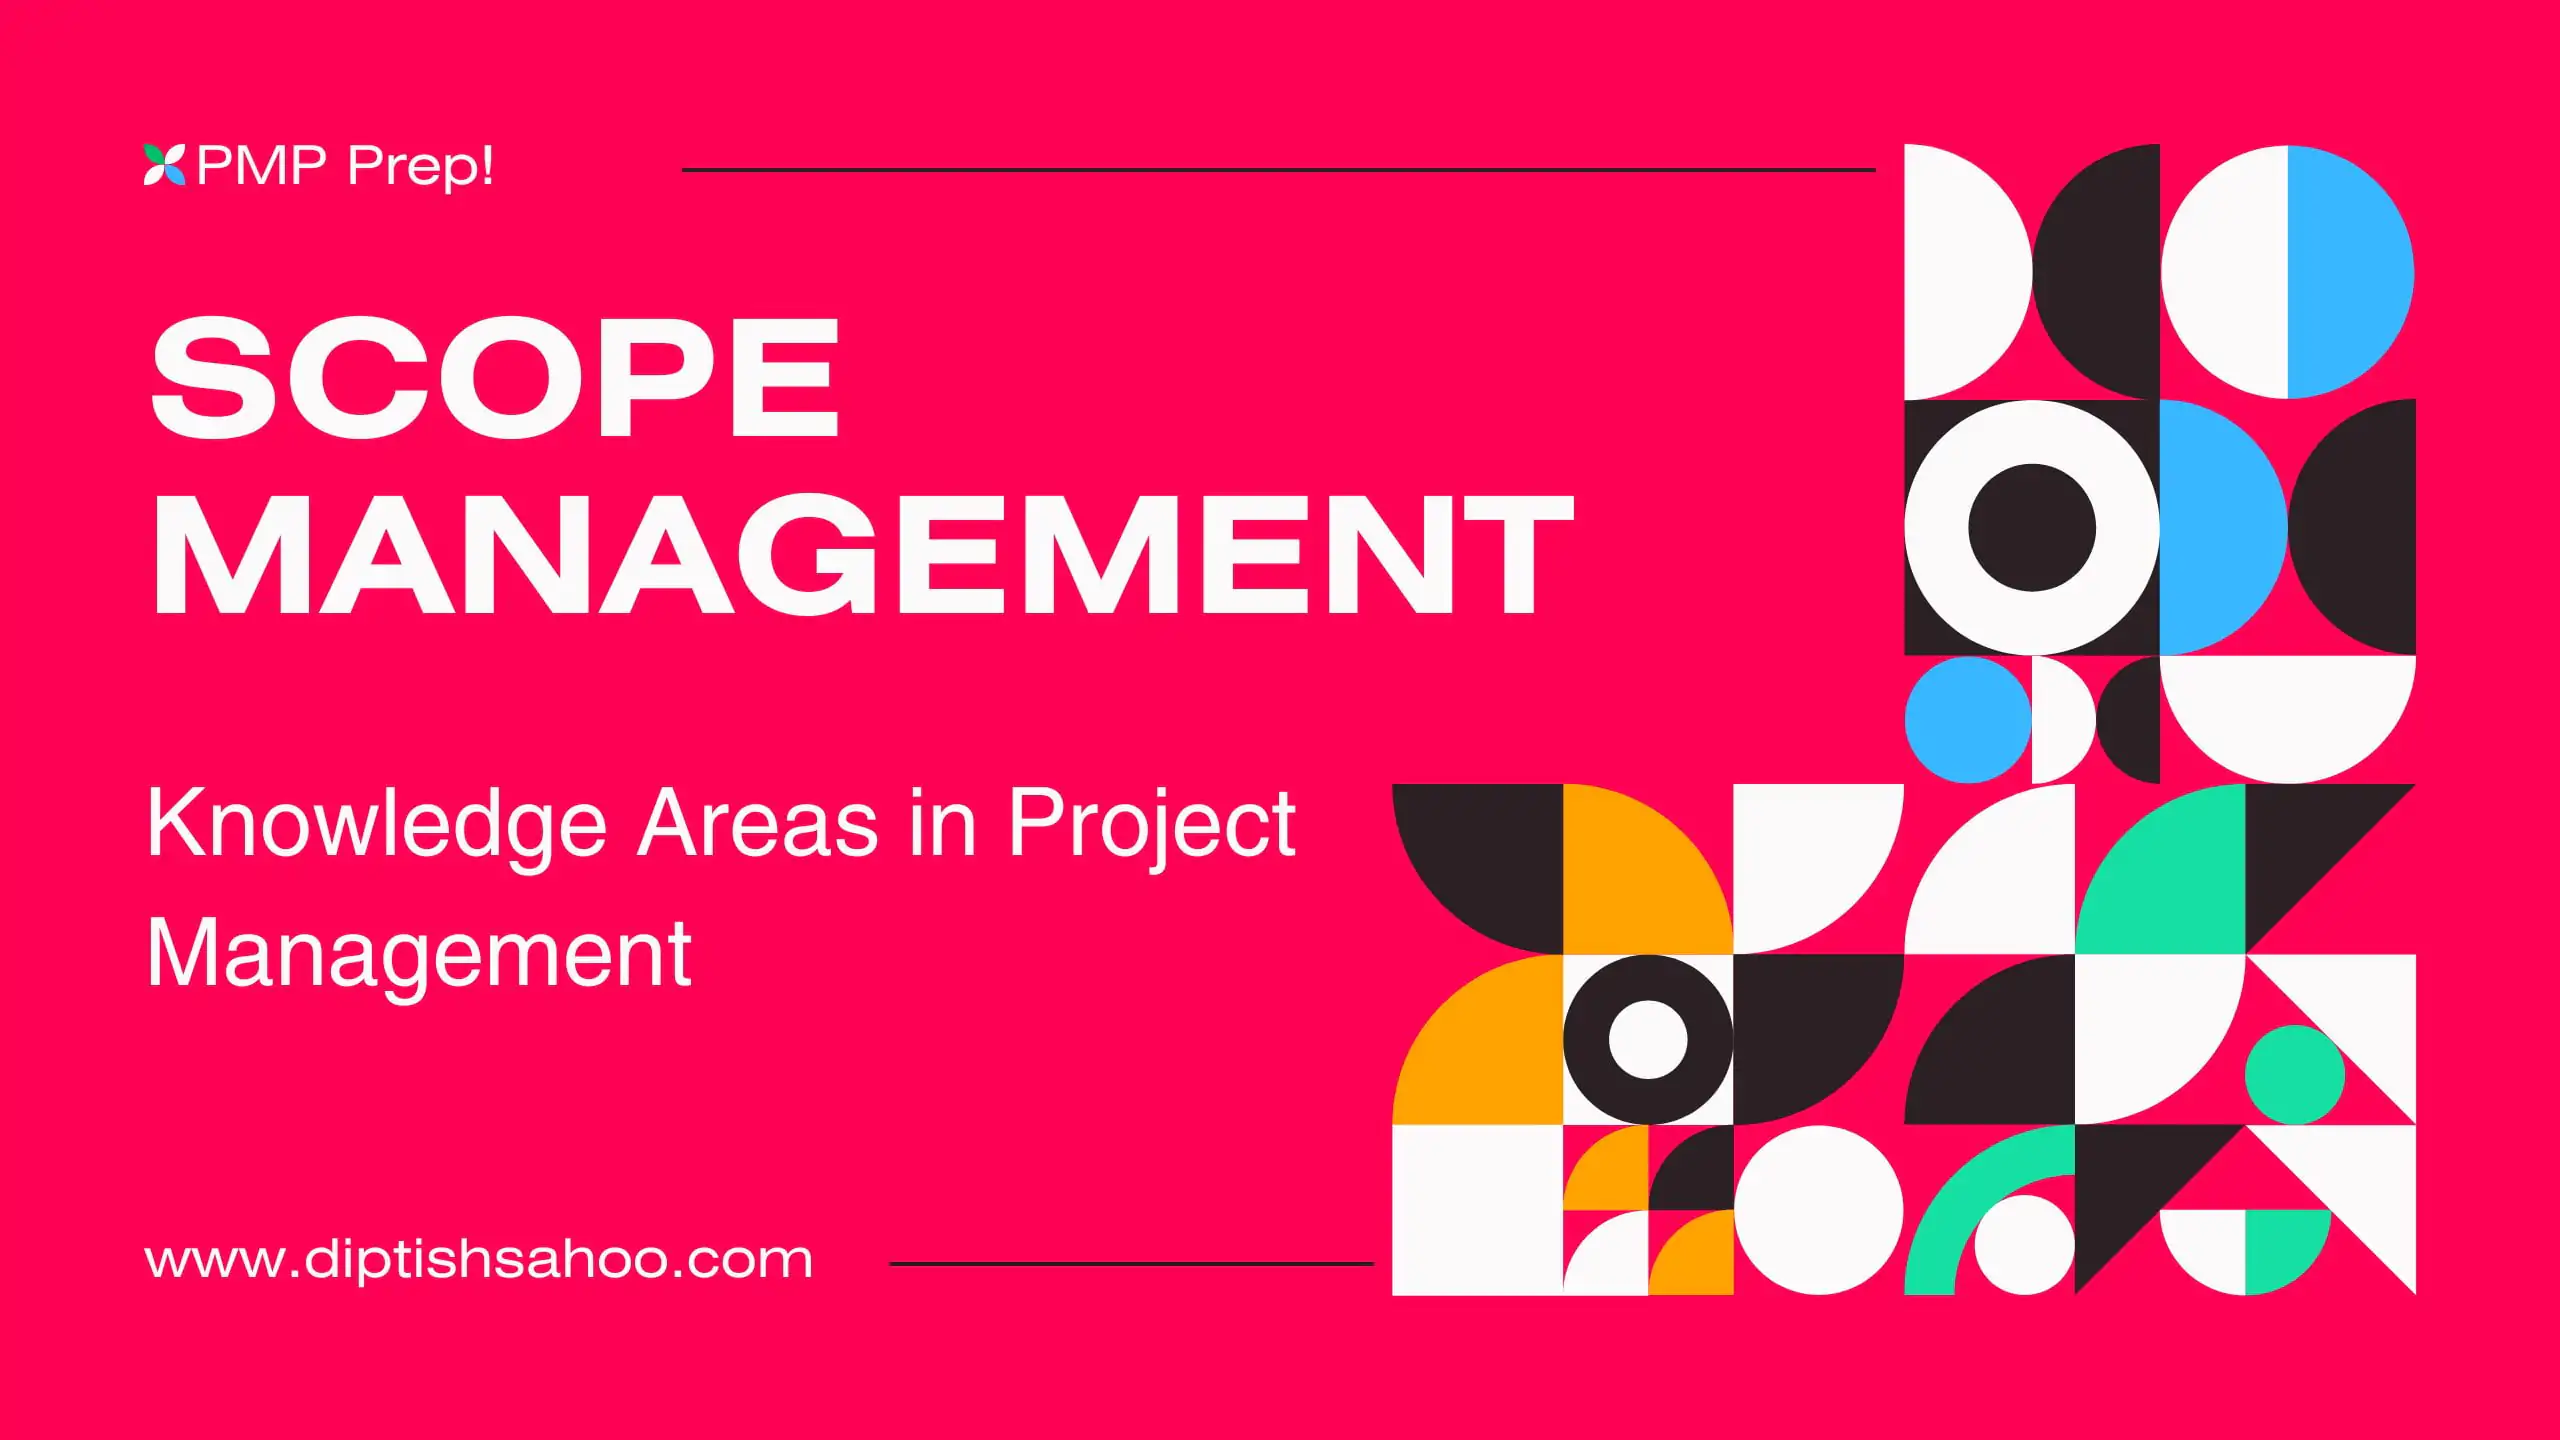 Scope Management Unveiled for Project Management